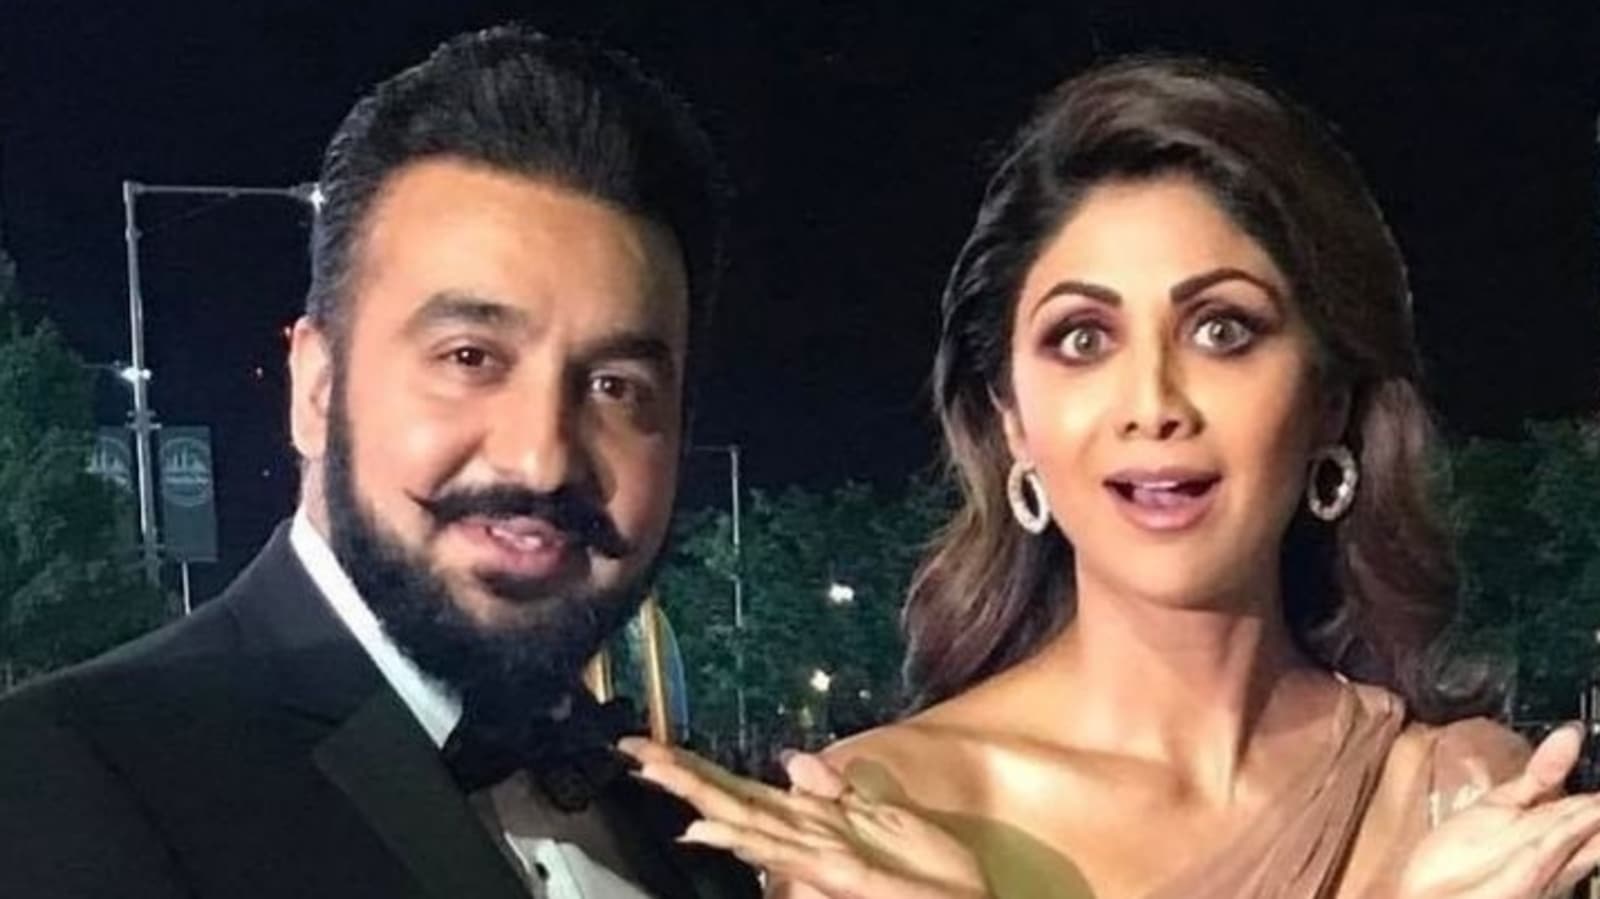 Xxx Sex Shilpa Shinda Videos Indians - Shilpa Shetty broke down, fought with Raj Kundra during raid at home in porn  case: report | Bollywood - Hindustan Times